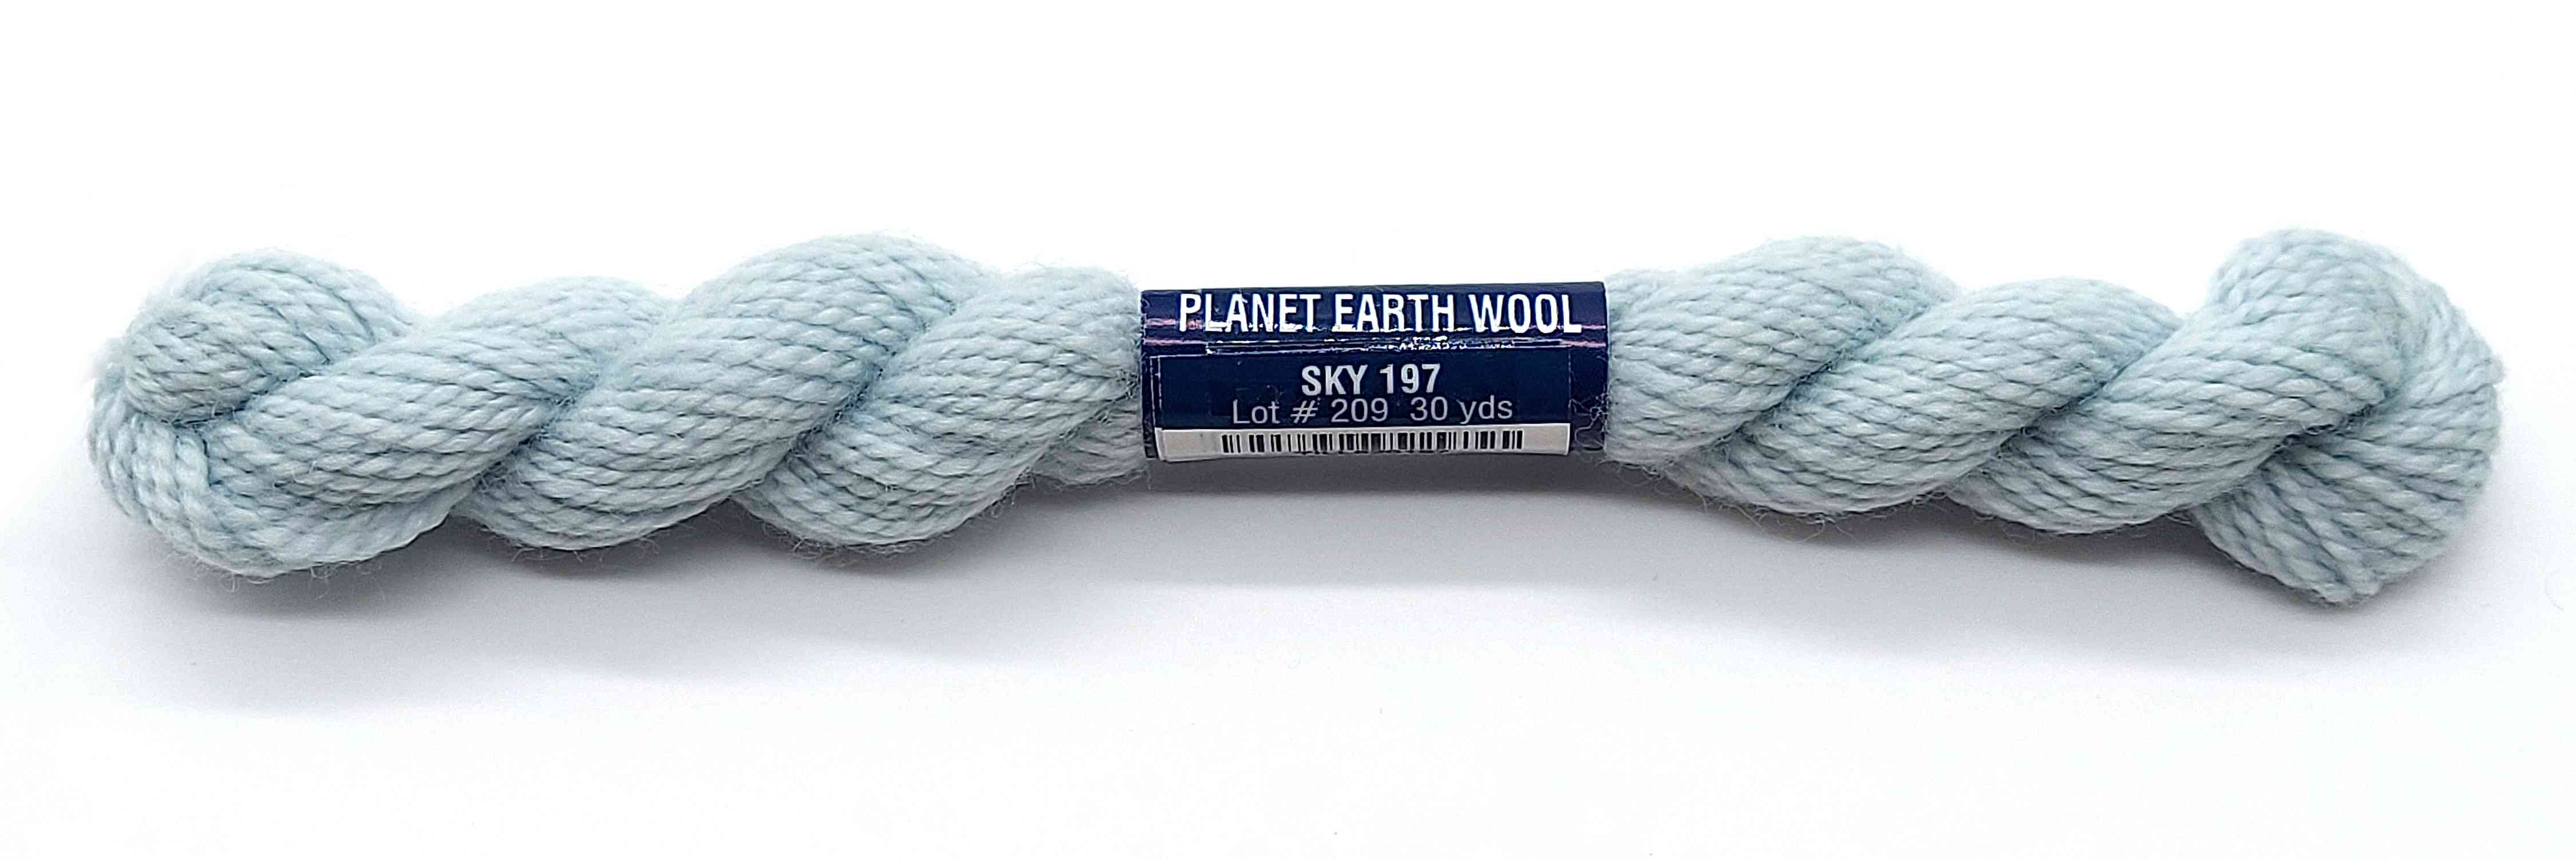 Planet Earth Wool 197 Sky - The Flying Needles